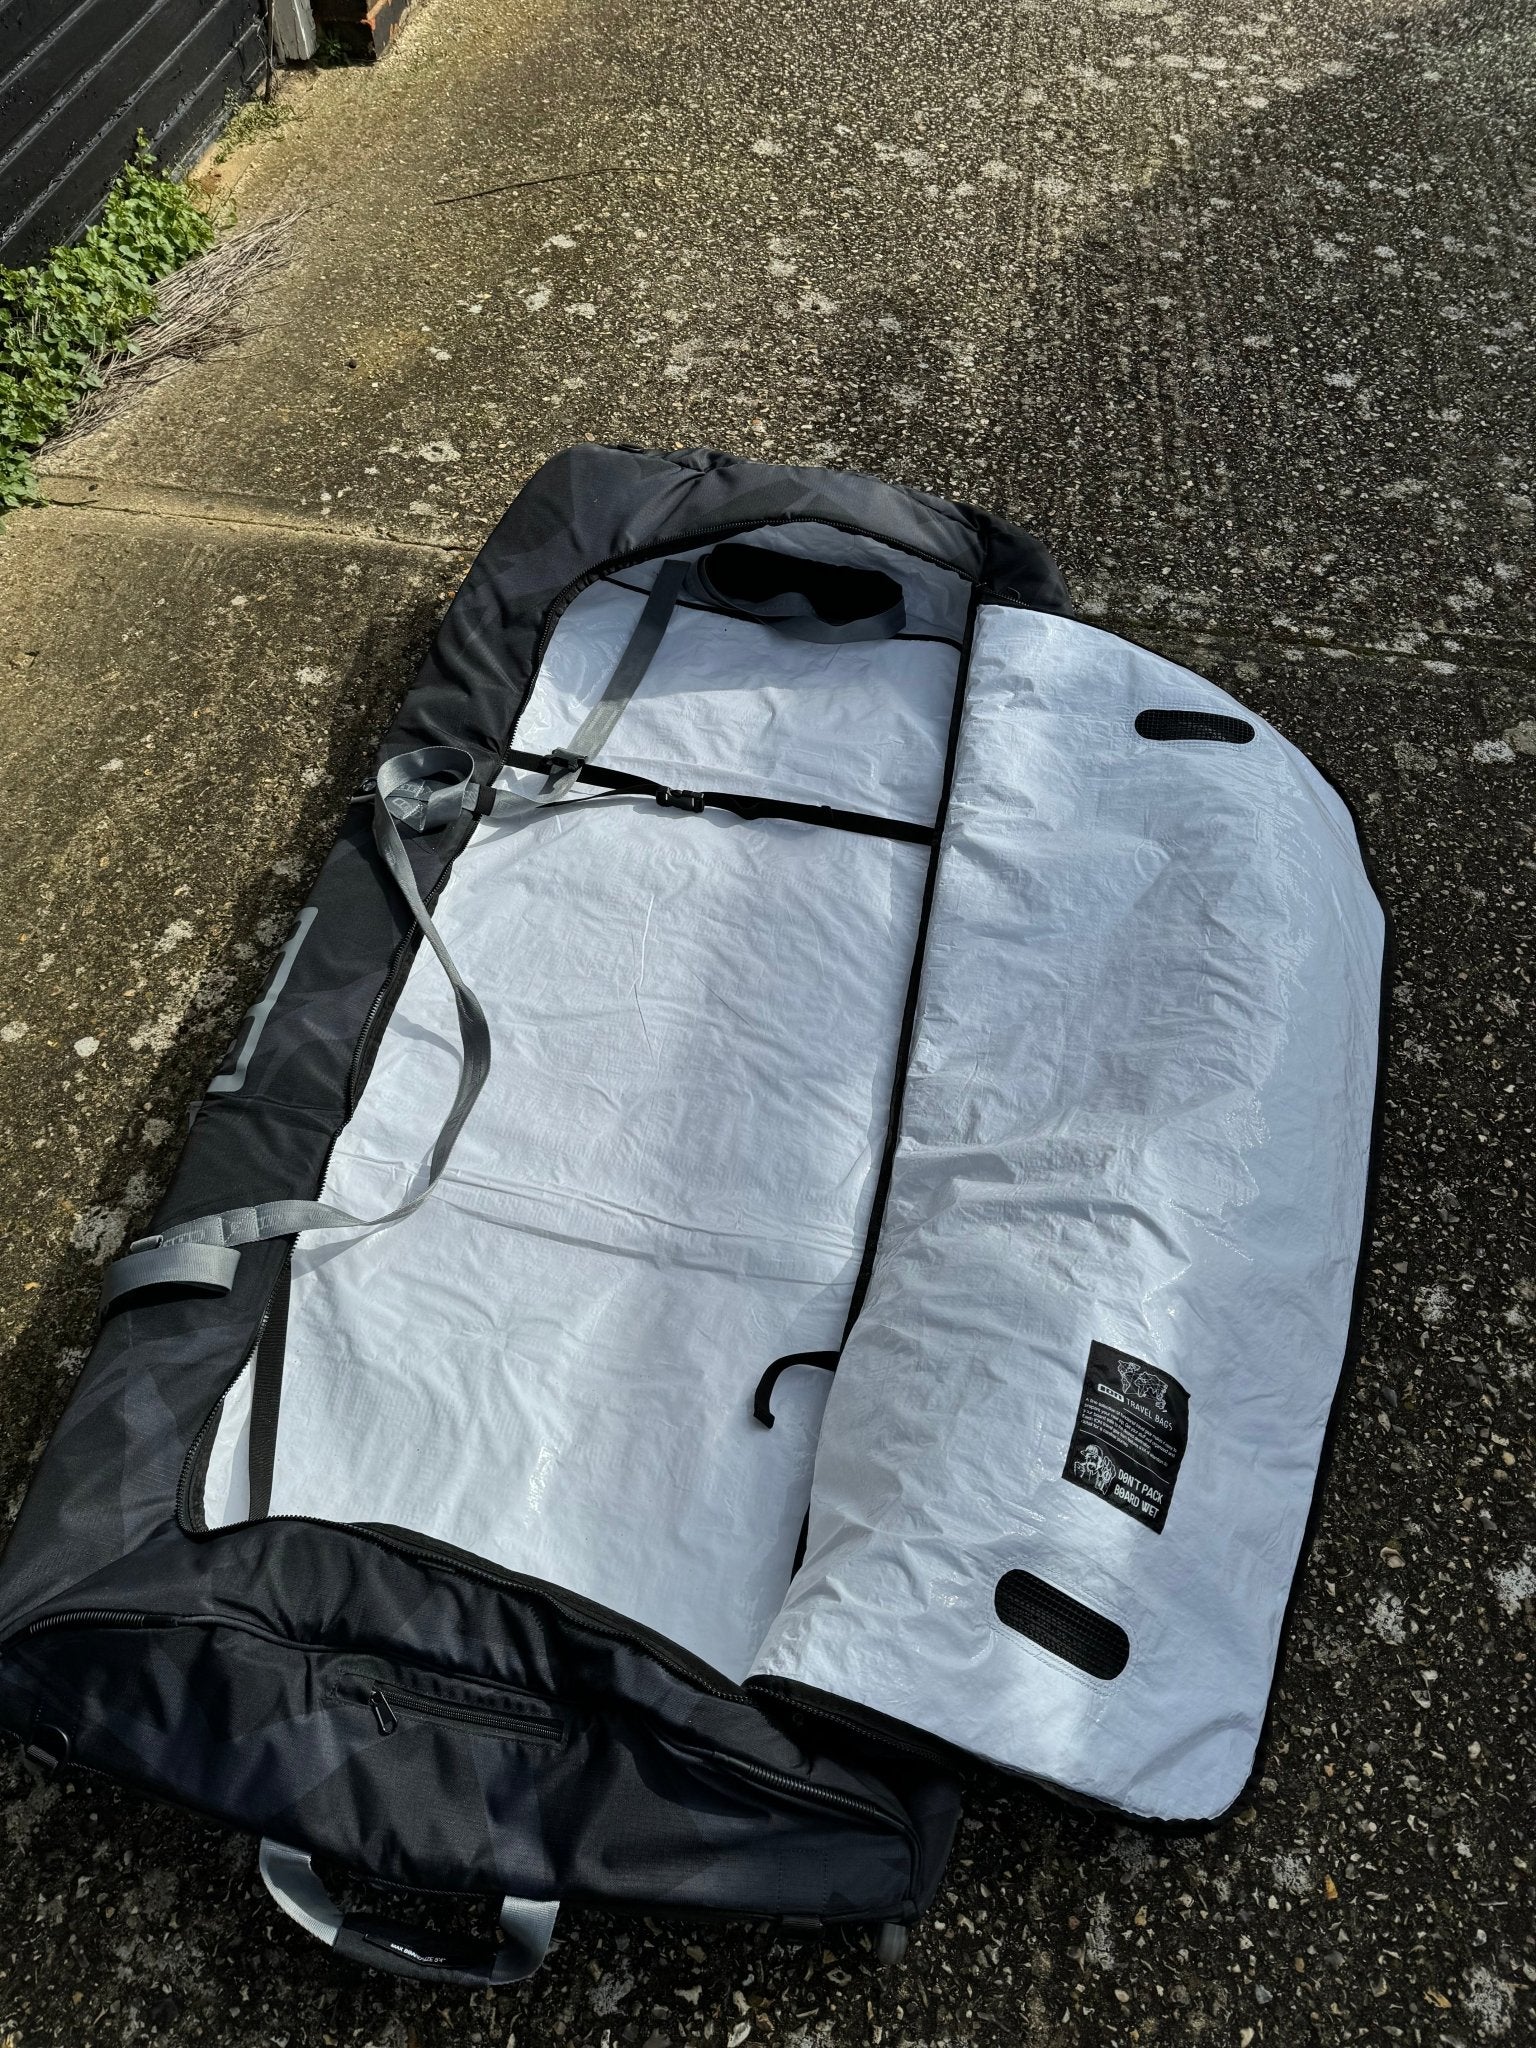 ION Wing Foil Travel Bag - Worthing Watersports - board bag - Worthing Watersports